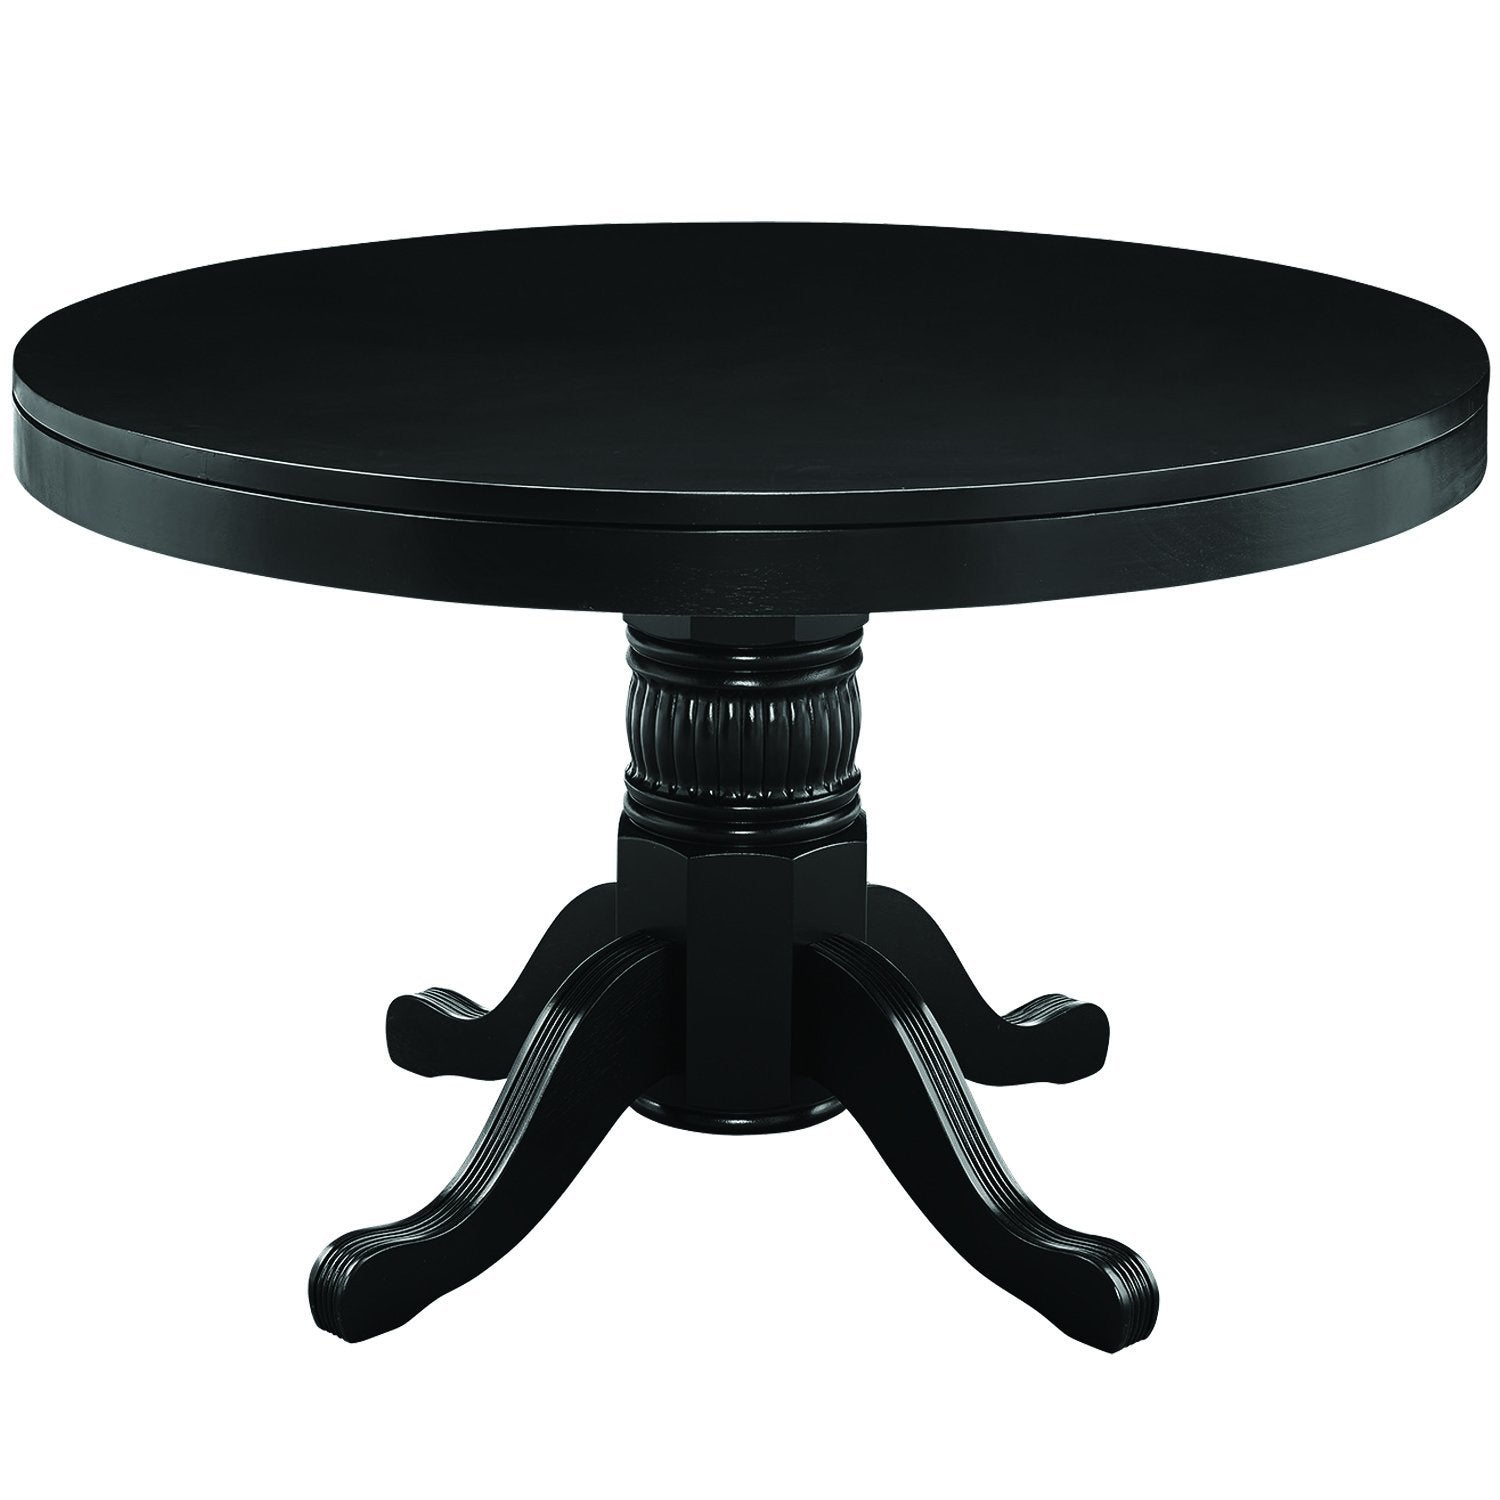 RAM Game Room 48" Game Table - Black